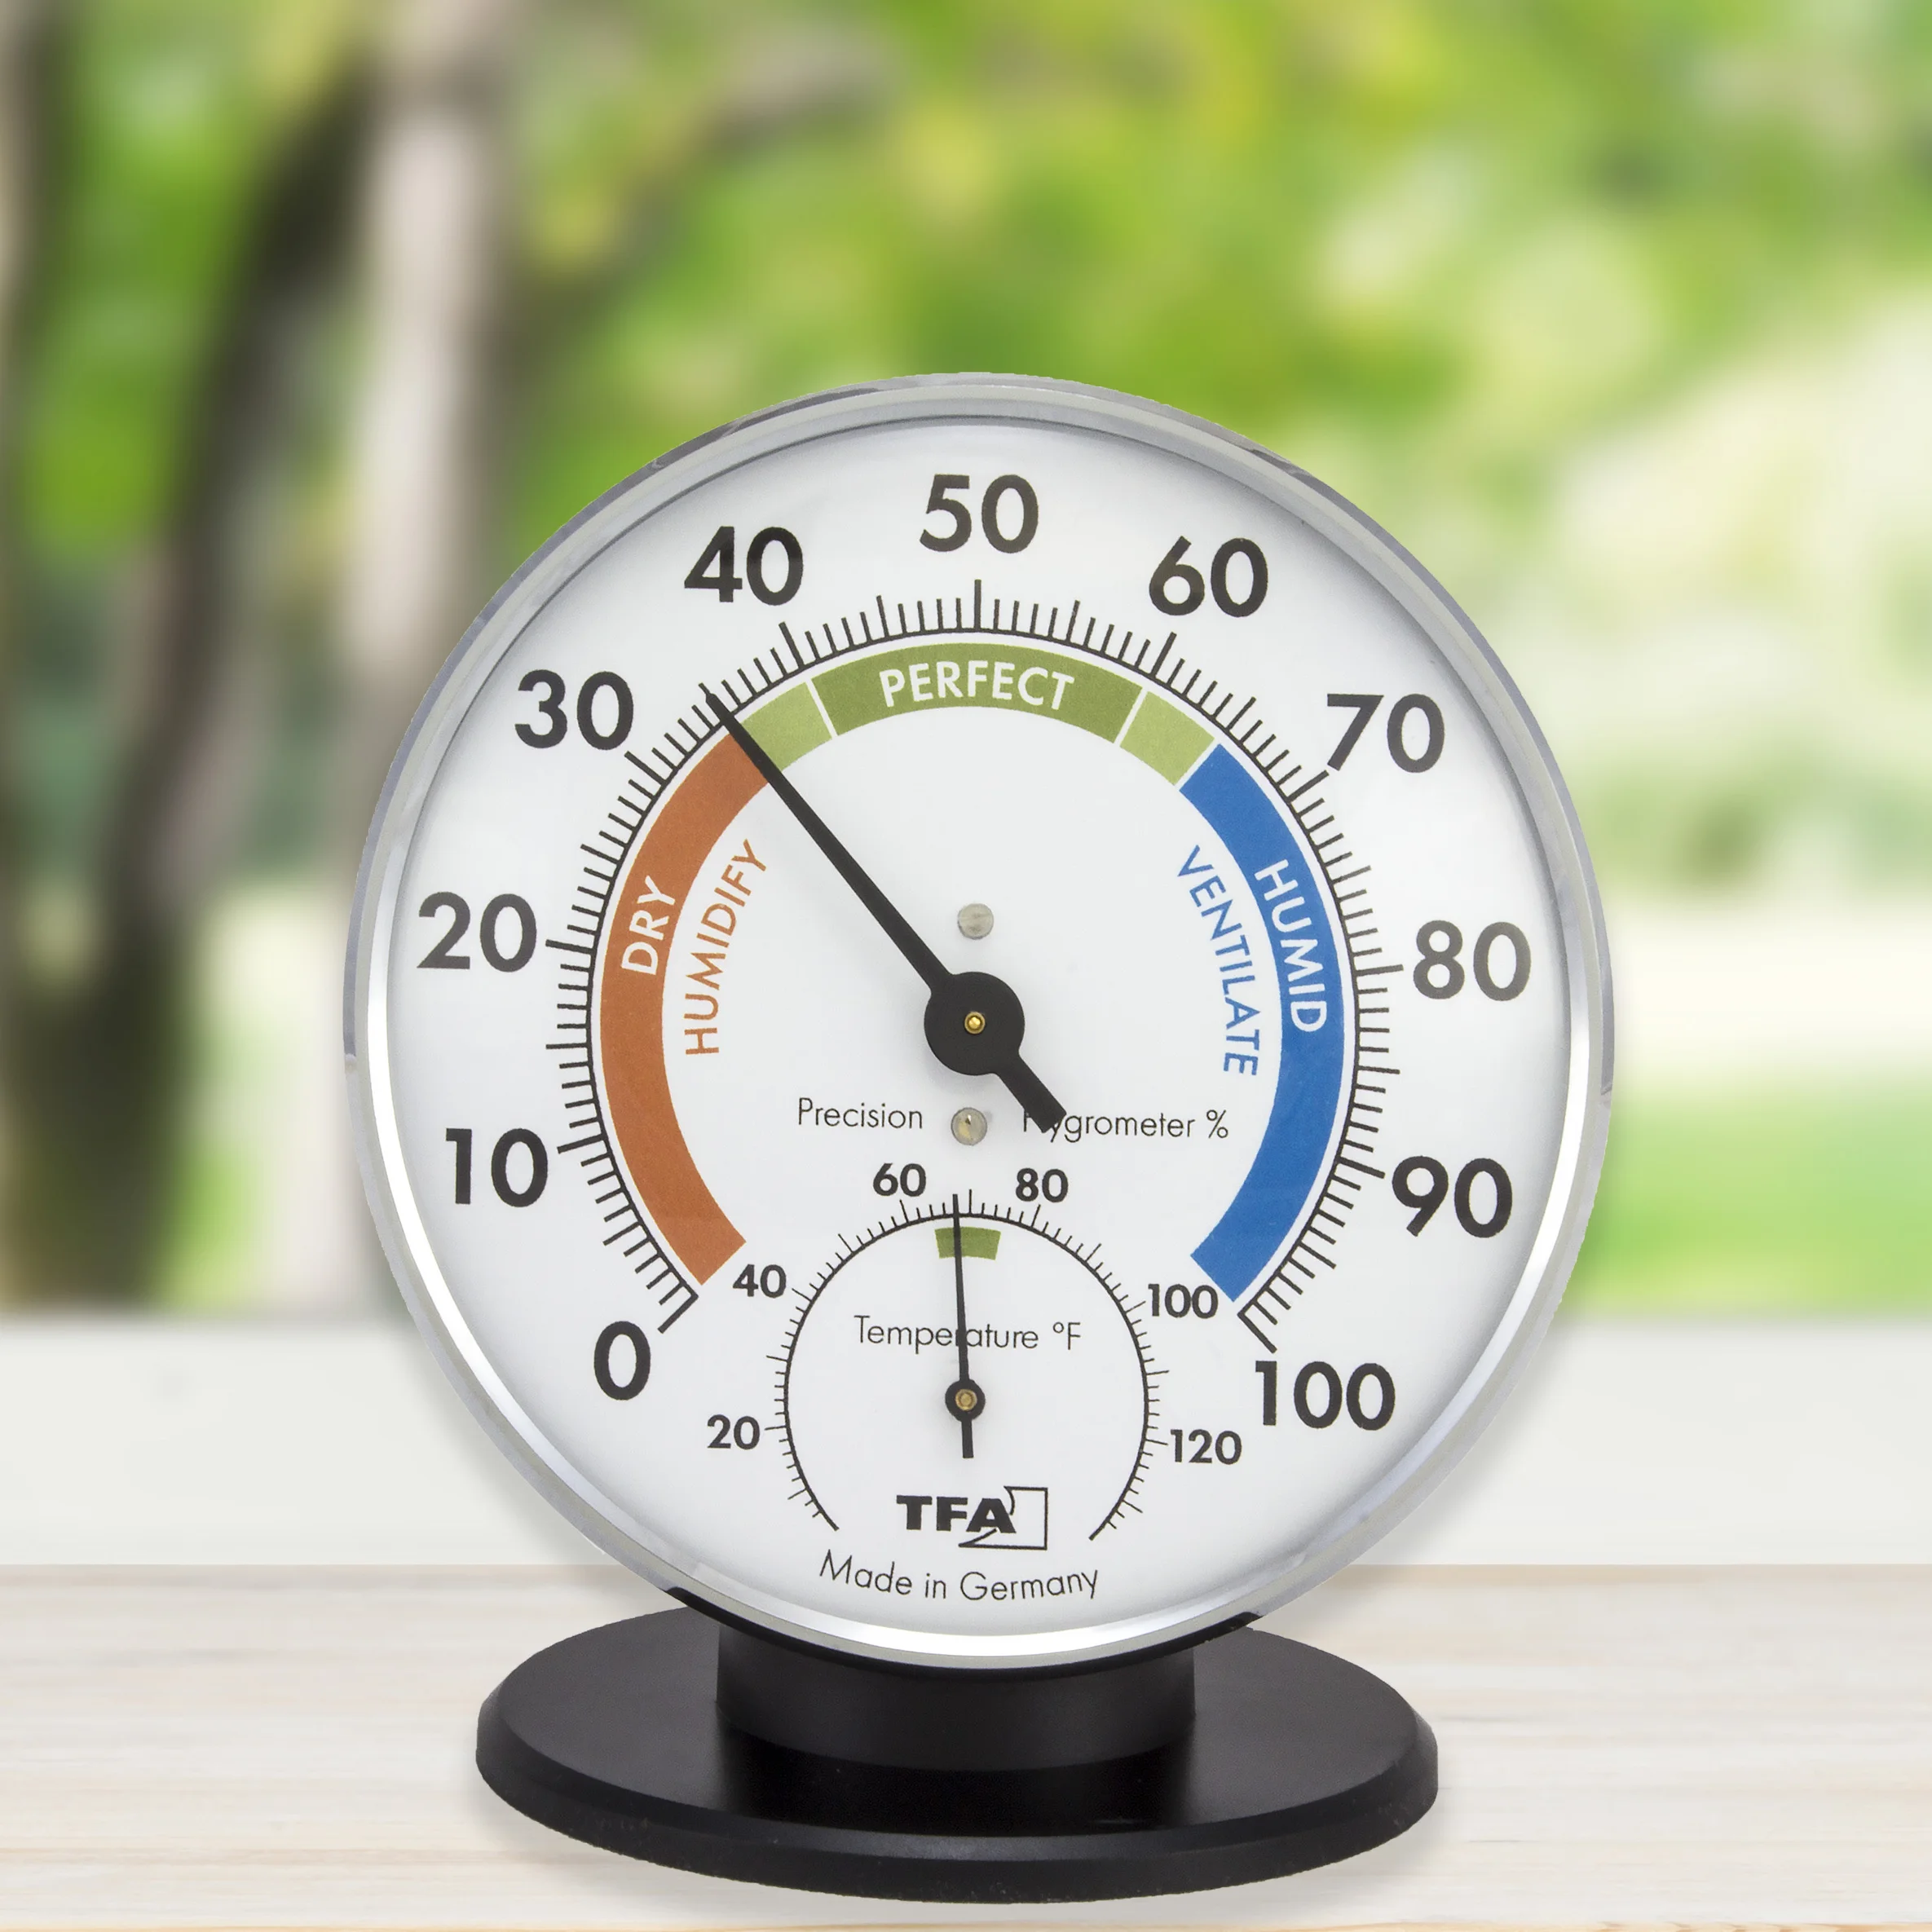 Which Weather Instrument Measures Relative Humidity